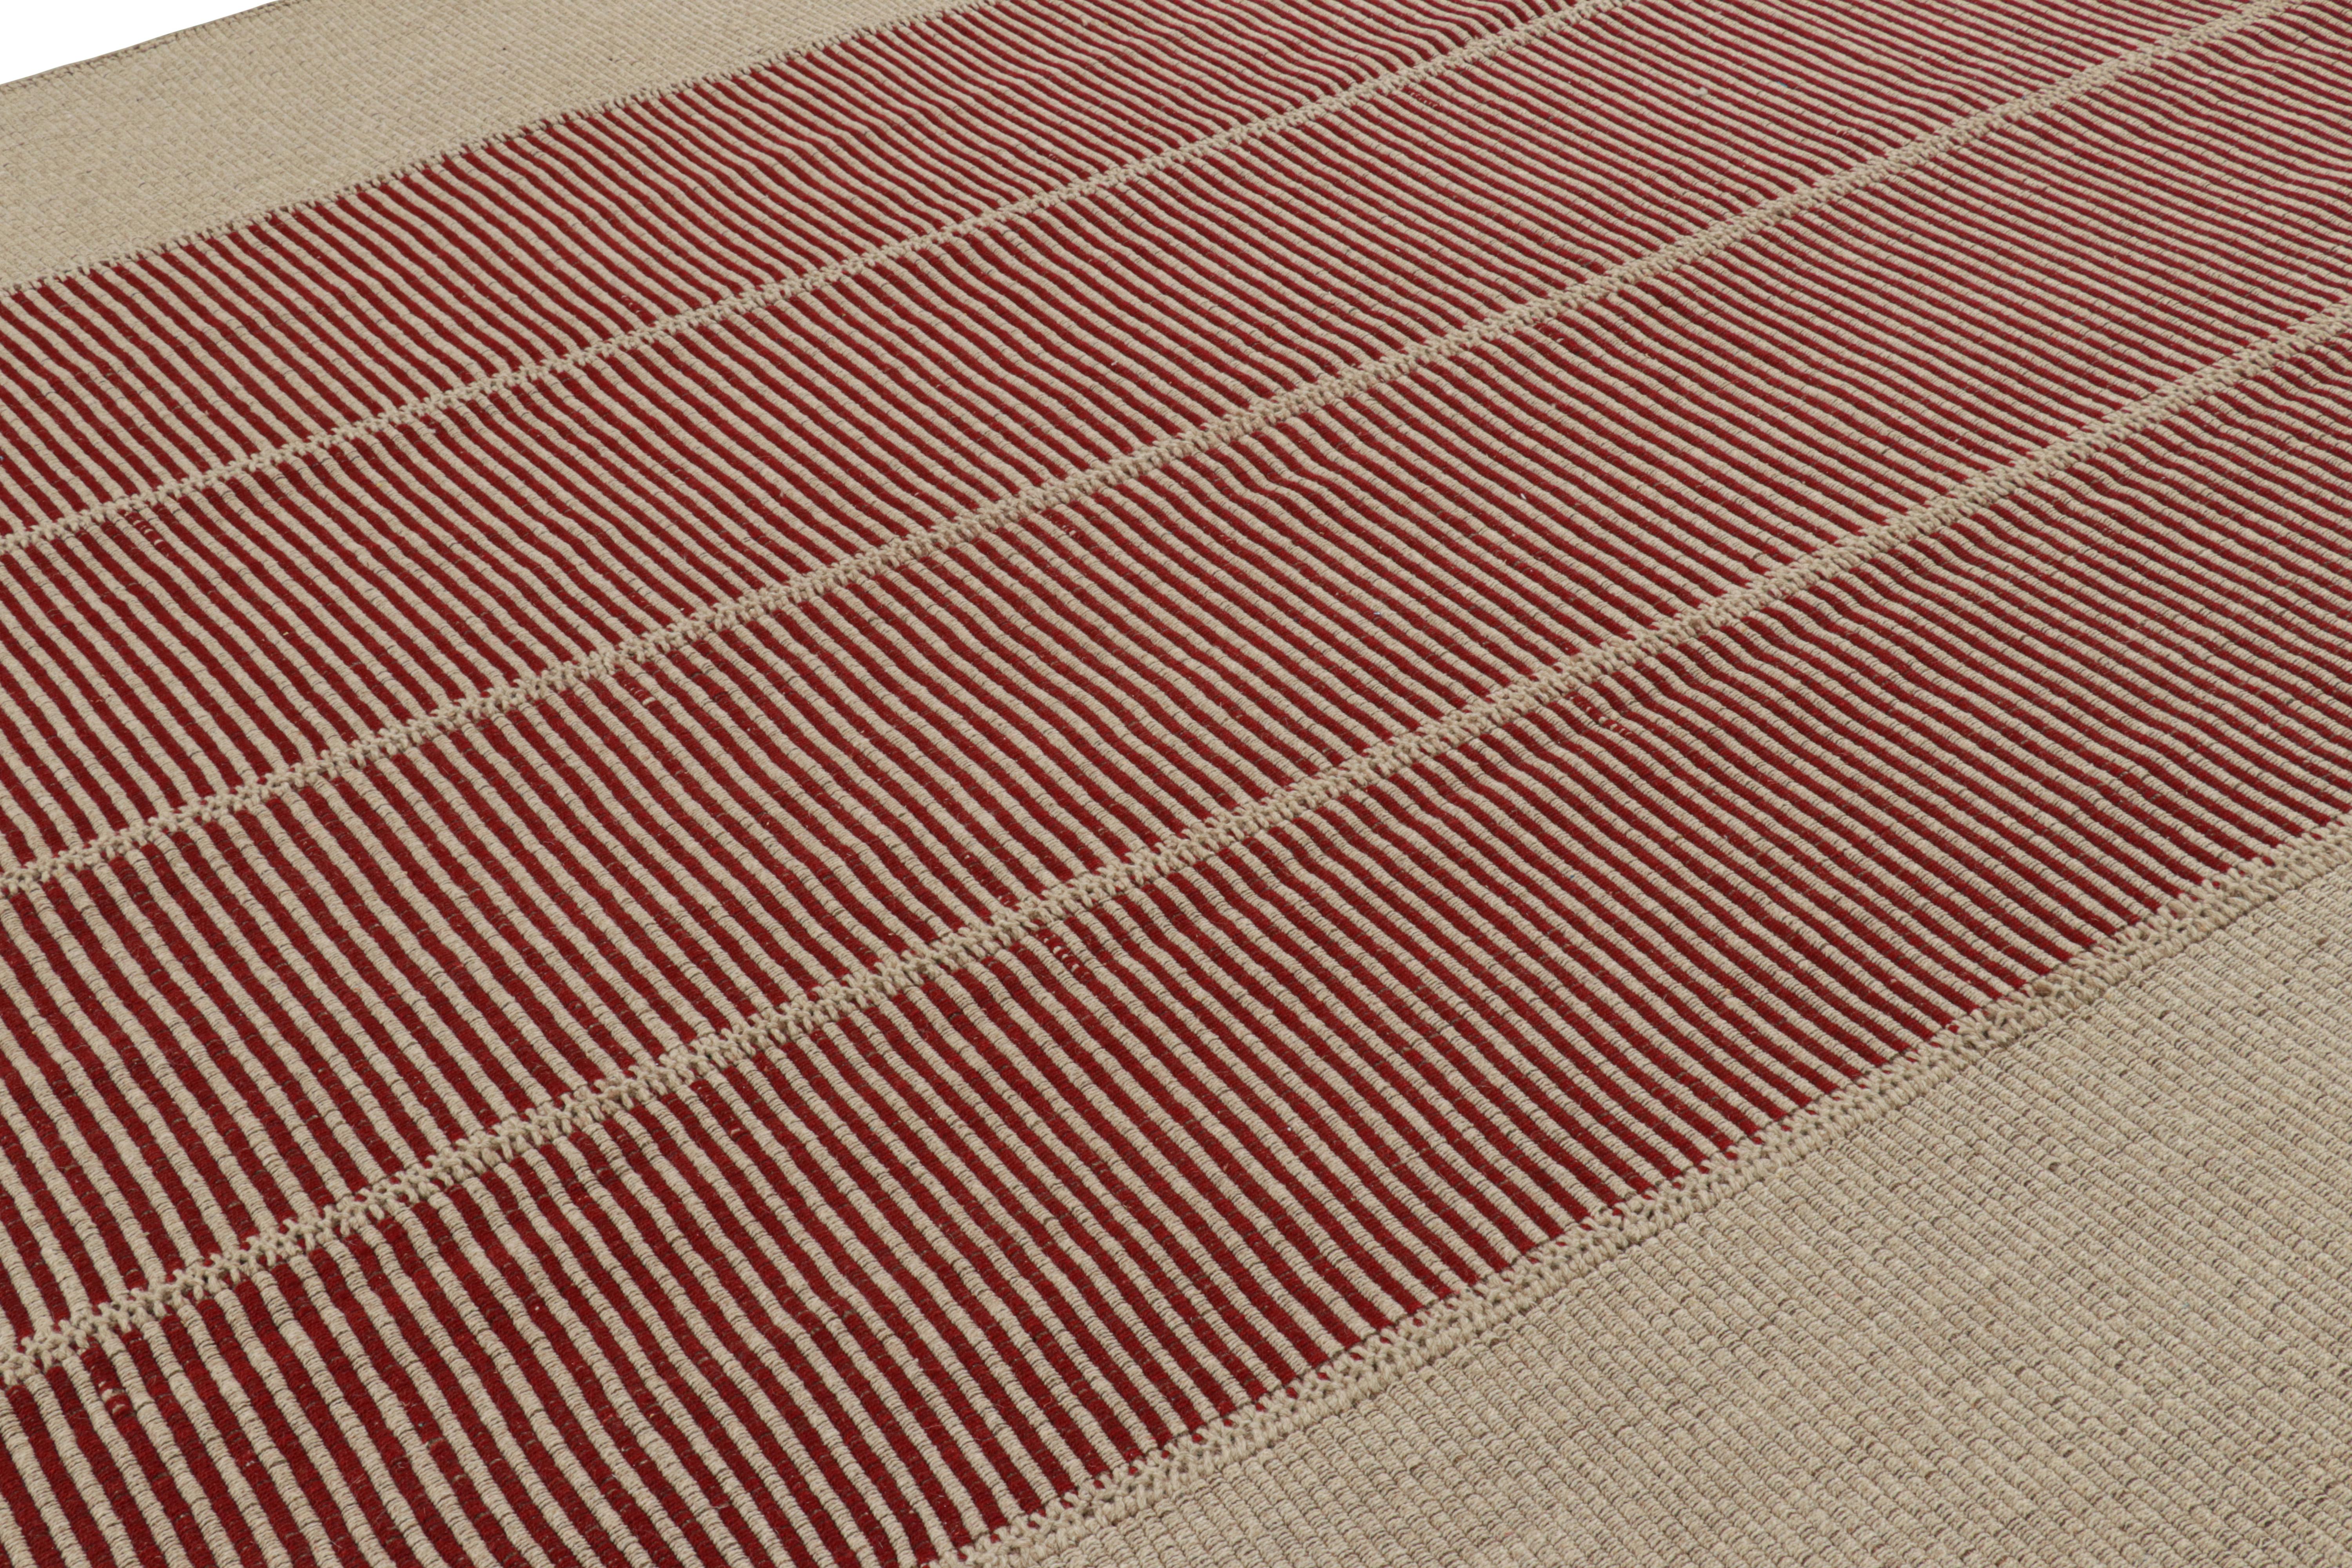 Handwoven in wool, a 10x14 Kilim design from an inventive new contemporary flat weave collection by Rug & Kilim.

On the Design: 

Fondly dubbed, “Rez Kilims”, this modern take on classic panel-weaving enjoys a fabulous, unique play of deep red and